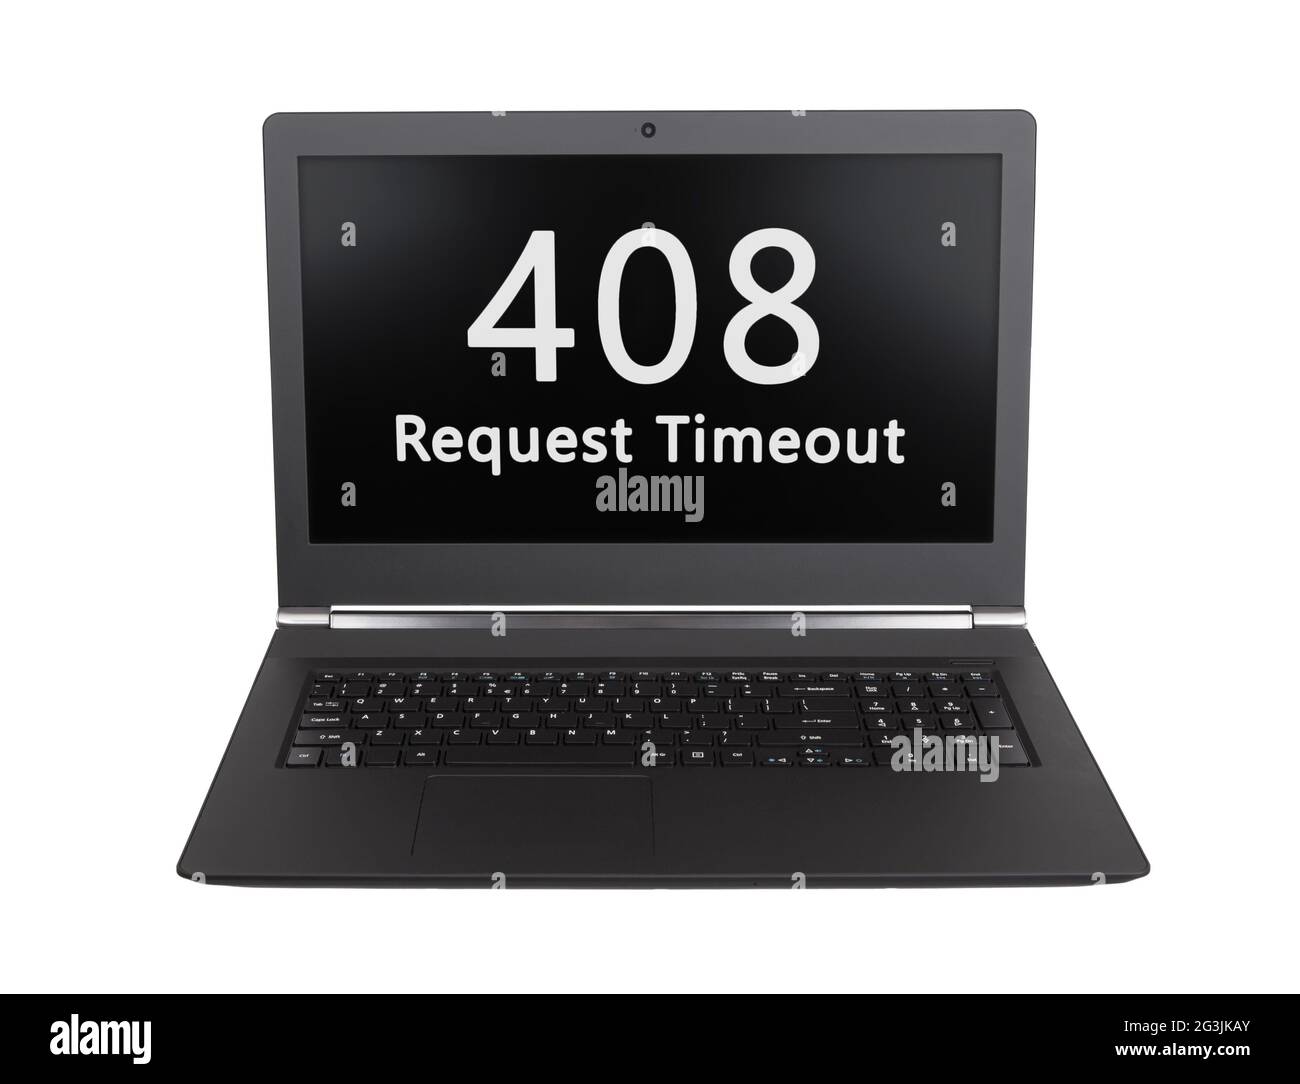 http-status-code-408-request-timeout-stock-photo-alamy